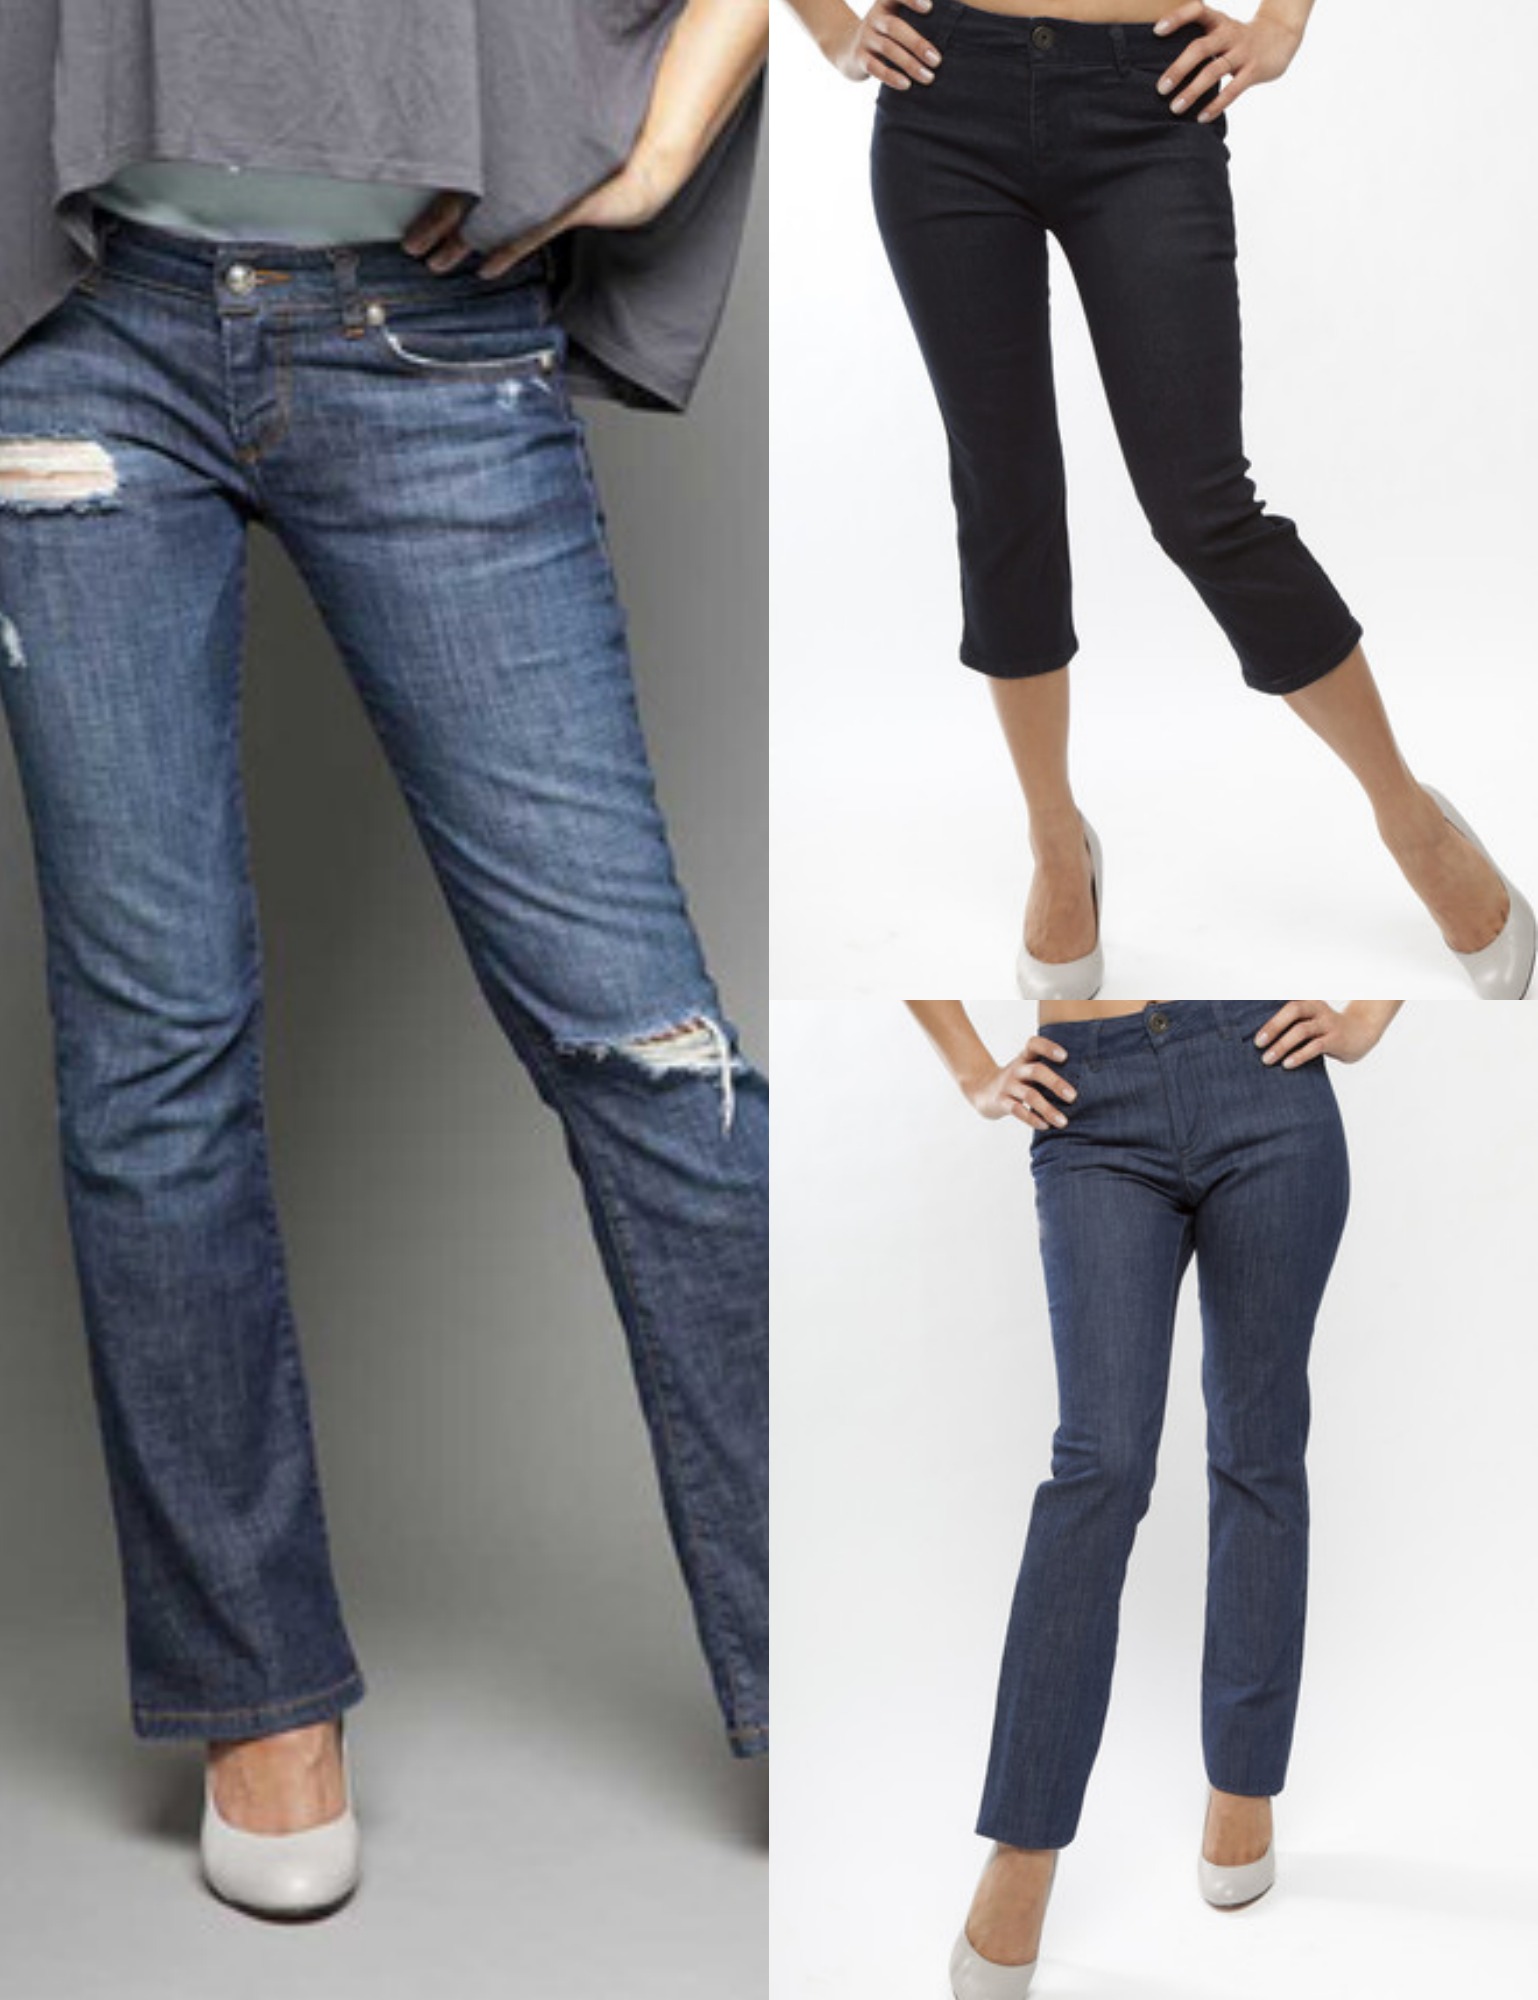 Wearable Fashion Trends With Denim For Petite Women - Bella Petite